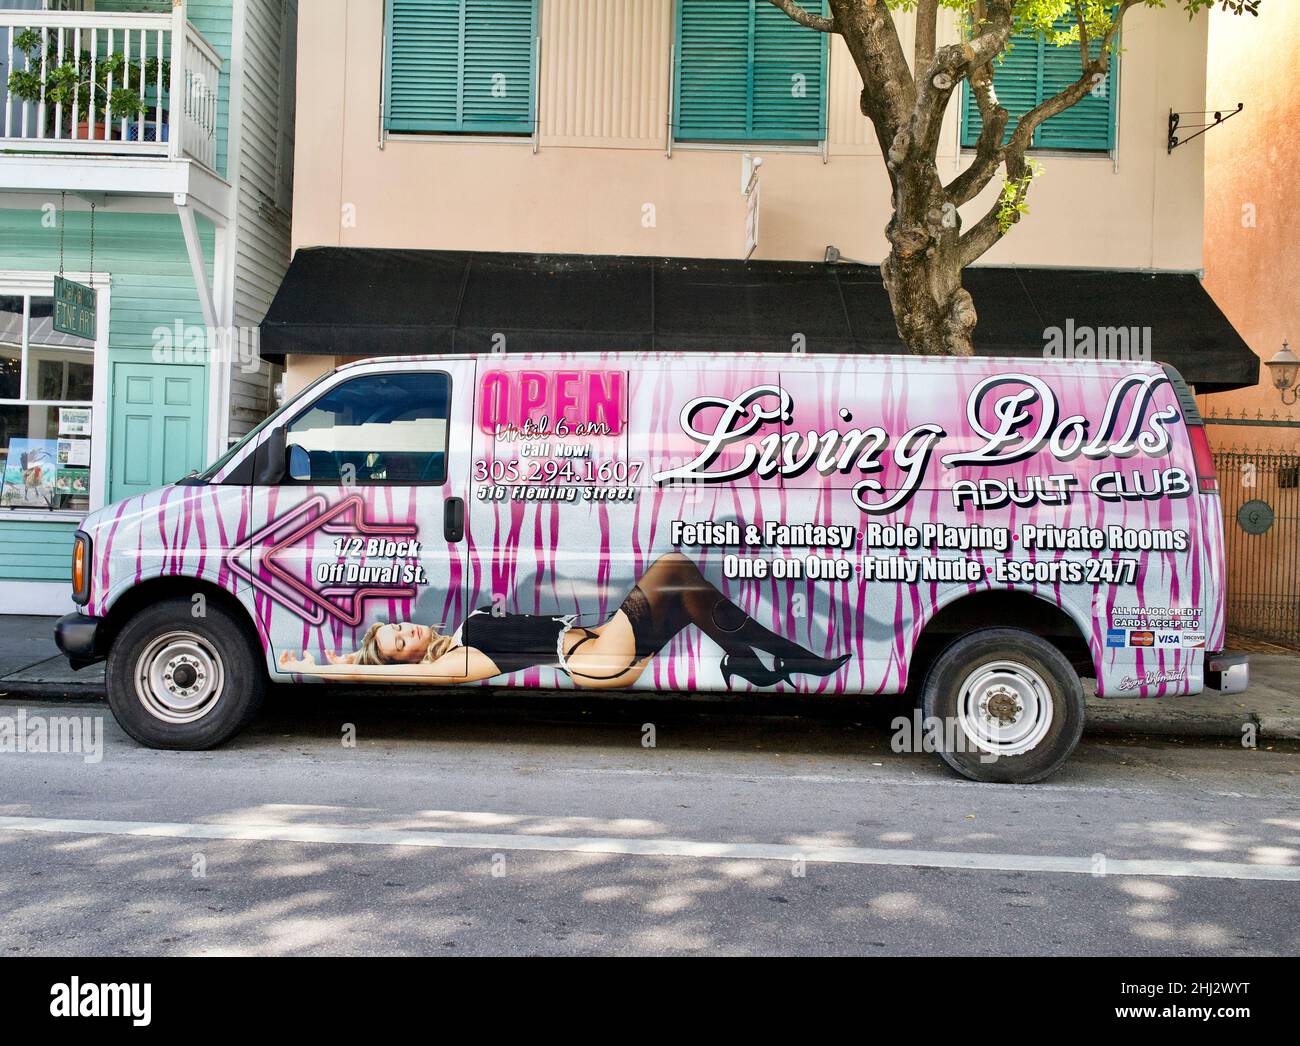 Living Dolls Van in Key West, Florida, FL, USA.  Adult Club off of Duval Street on Fleming St.  Painted van with advertising for Gentleman’s Club. Stock Photo